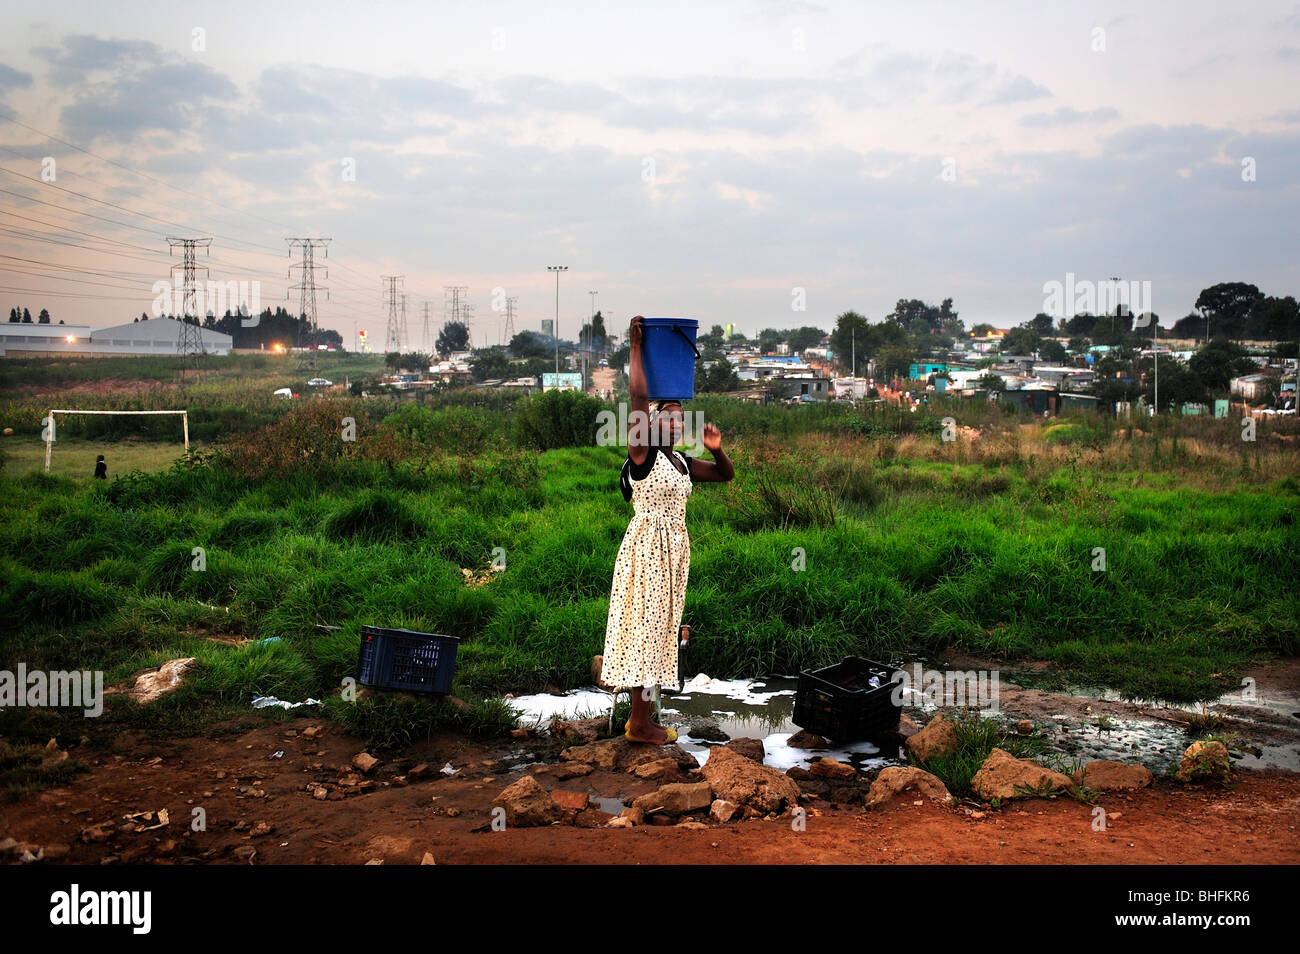 A woman is seen in Soweto, South Africa. Football world cup will run in South Africa on 2010. Stock Photo